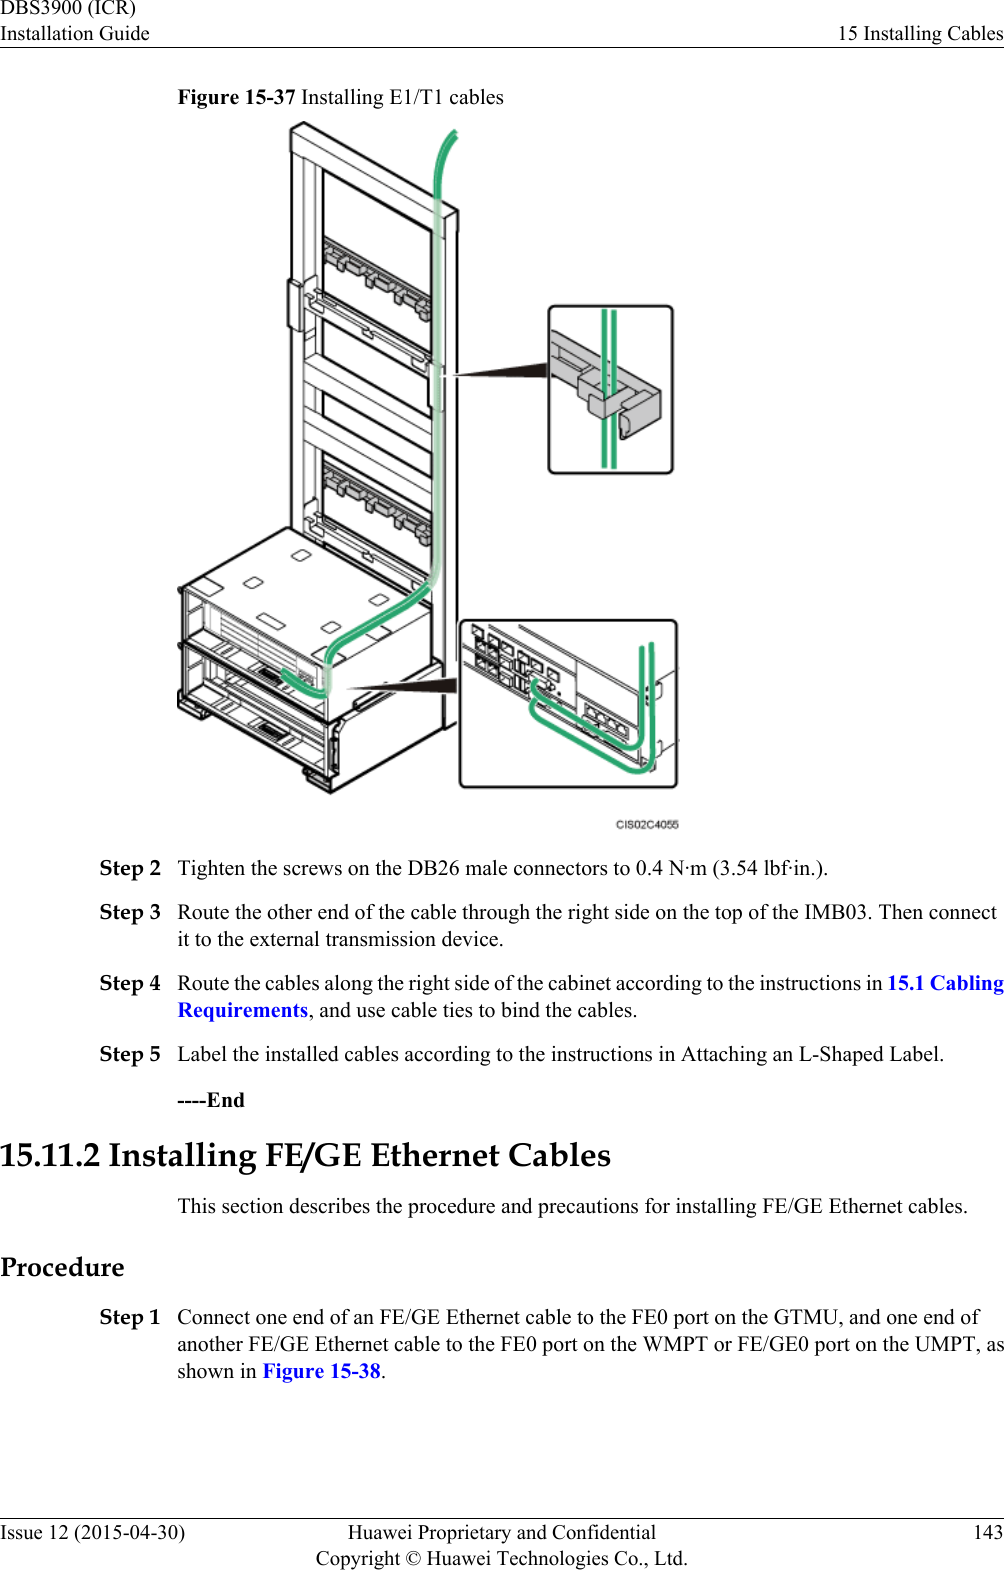 Figure 15-37 Installing E1/T1 cablesStep 2 Tighten the screws on the DB26 male connectors to 0.4 N·m (3.54 lbf·in.).Step 3 Route the other end of the cable through the right side on the top of the IMB03. Then connectit to the external transmission device.Step 4 Route the cables along the right side of the cabinet according to the instructions in 15.1 CablingRequirements, and use cable ties to bind the cables.Step 5 Label the installed cables according to the instructions in Attaching an L-Shaped Label.----End15.11.2 Installing FE/GE Ethernet CablesThis section describes the procedure and precautions for installing FE/GE Ethernet cables.ProcedureStep 1 Connect one end of an FE/GE Ethernet cable to the FE0 port on the GTMU, and one end ofanother FE/GE Ethernet cable to the FE0 port on the WMPT or FE/GE0 port on the UMPT, asshown in Figure 15-38.DBS3900 (ICR)Installation Guide 15 Installing CablesIssue 12 (2015-04-30) Huawei Proprietary and ConfidentialCopyright © Huawei Technologies Co., Ltd.143